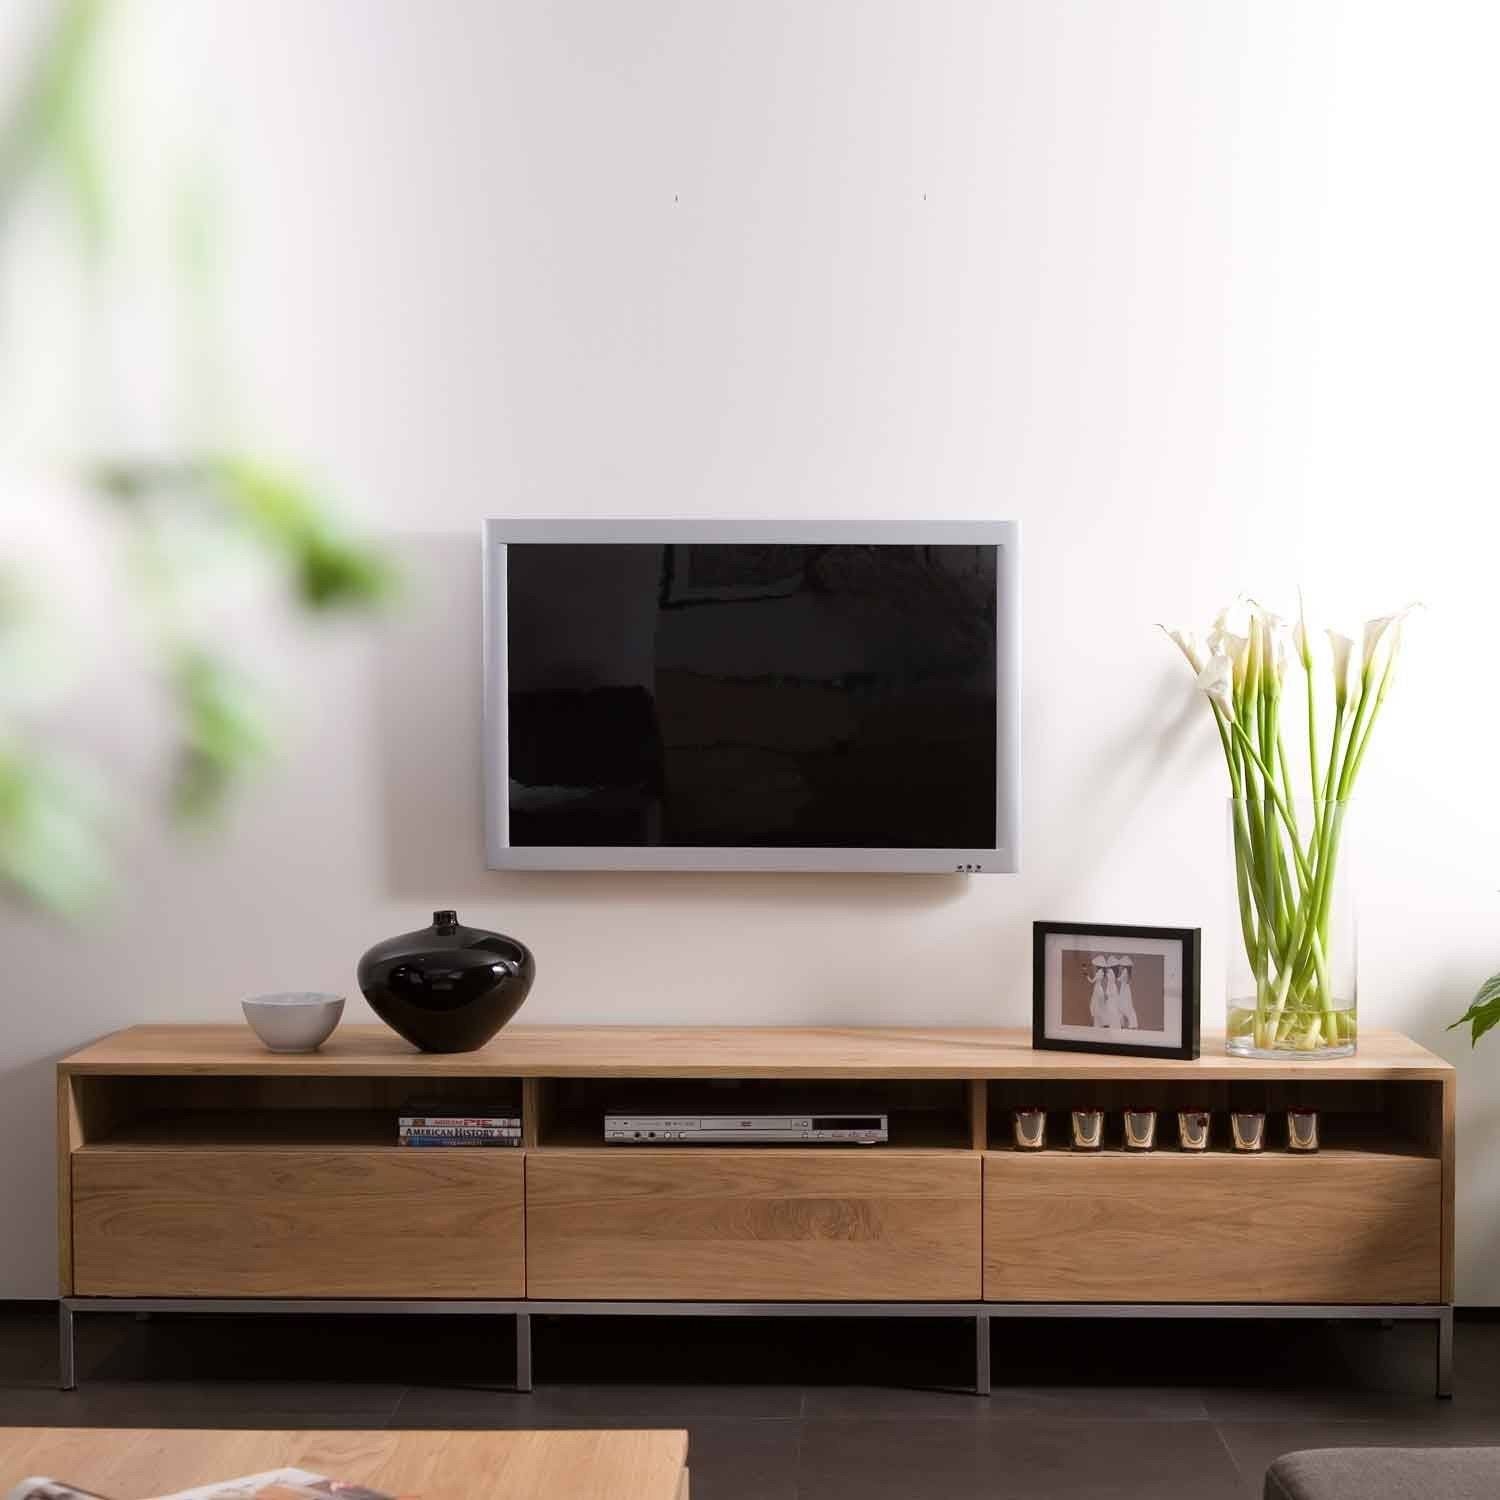 Ethnicraft Ligna Oak Tv Units | Solid Wood Furniture Throughout Contemporary Oak Tv Cabinets (View 1 of 15)